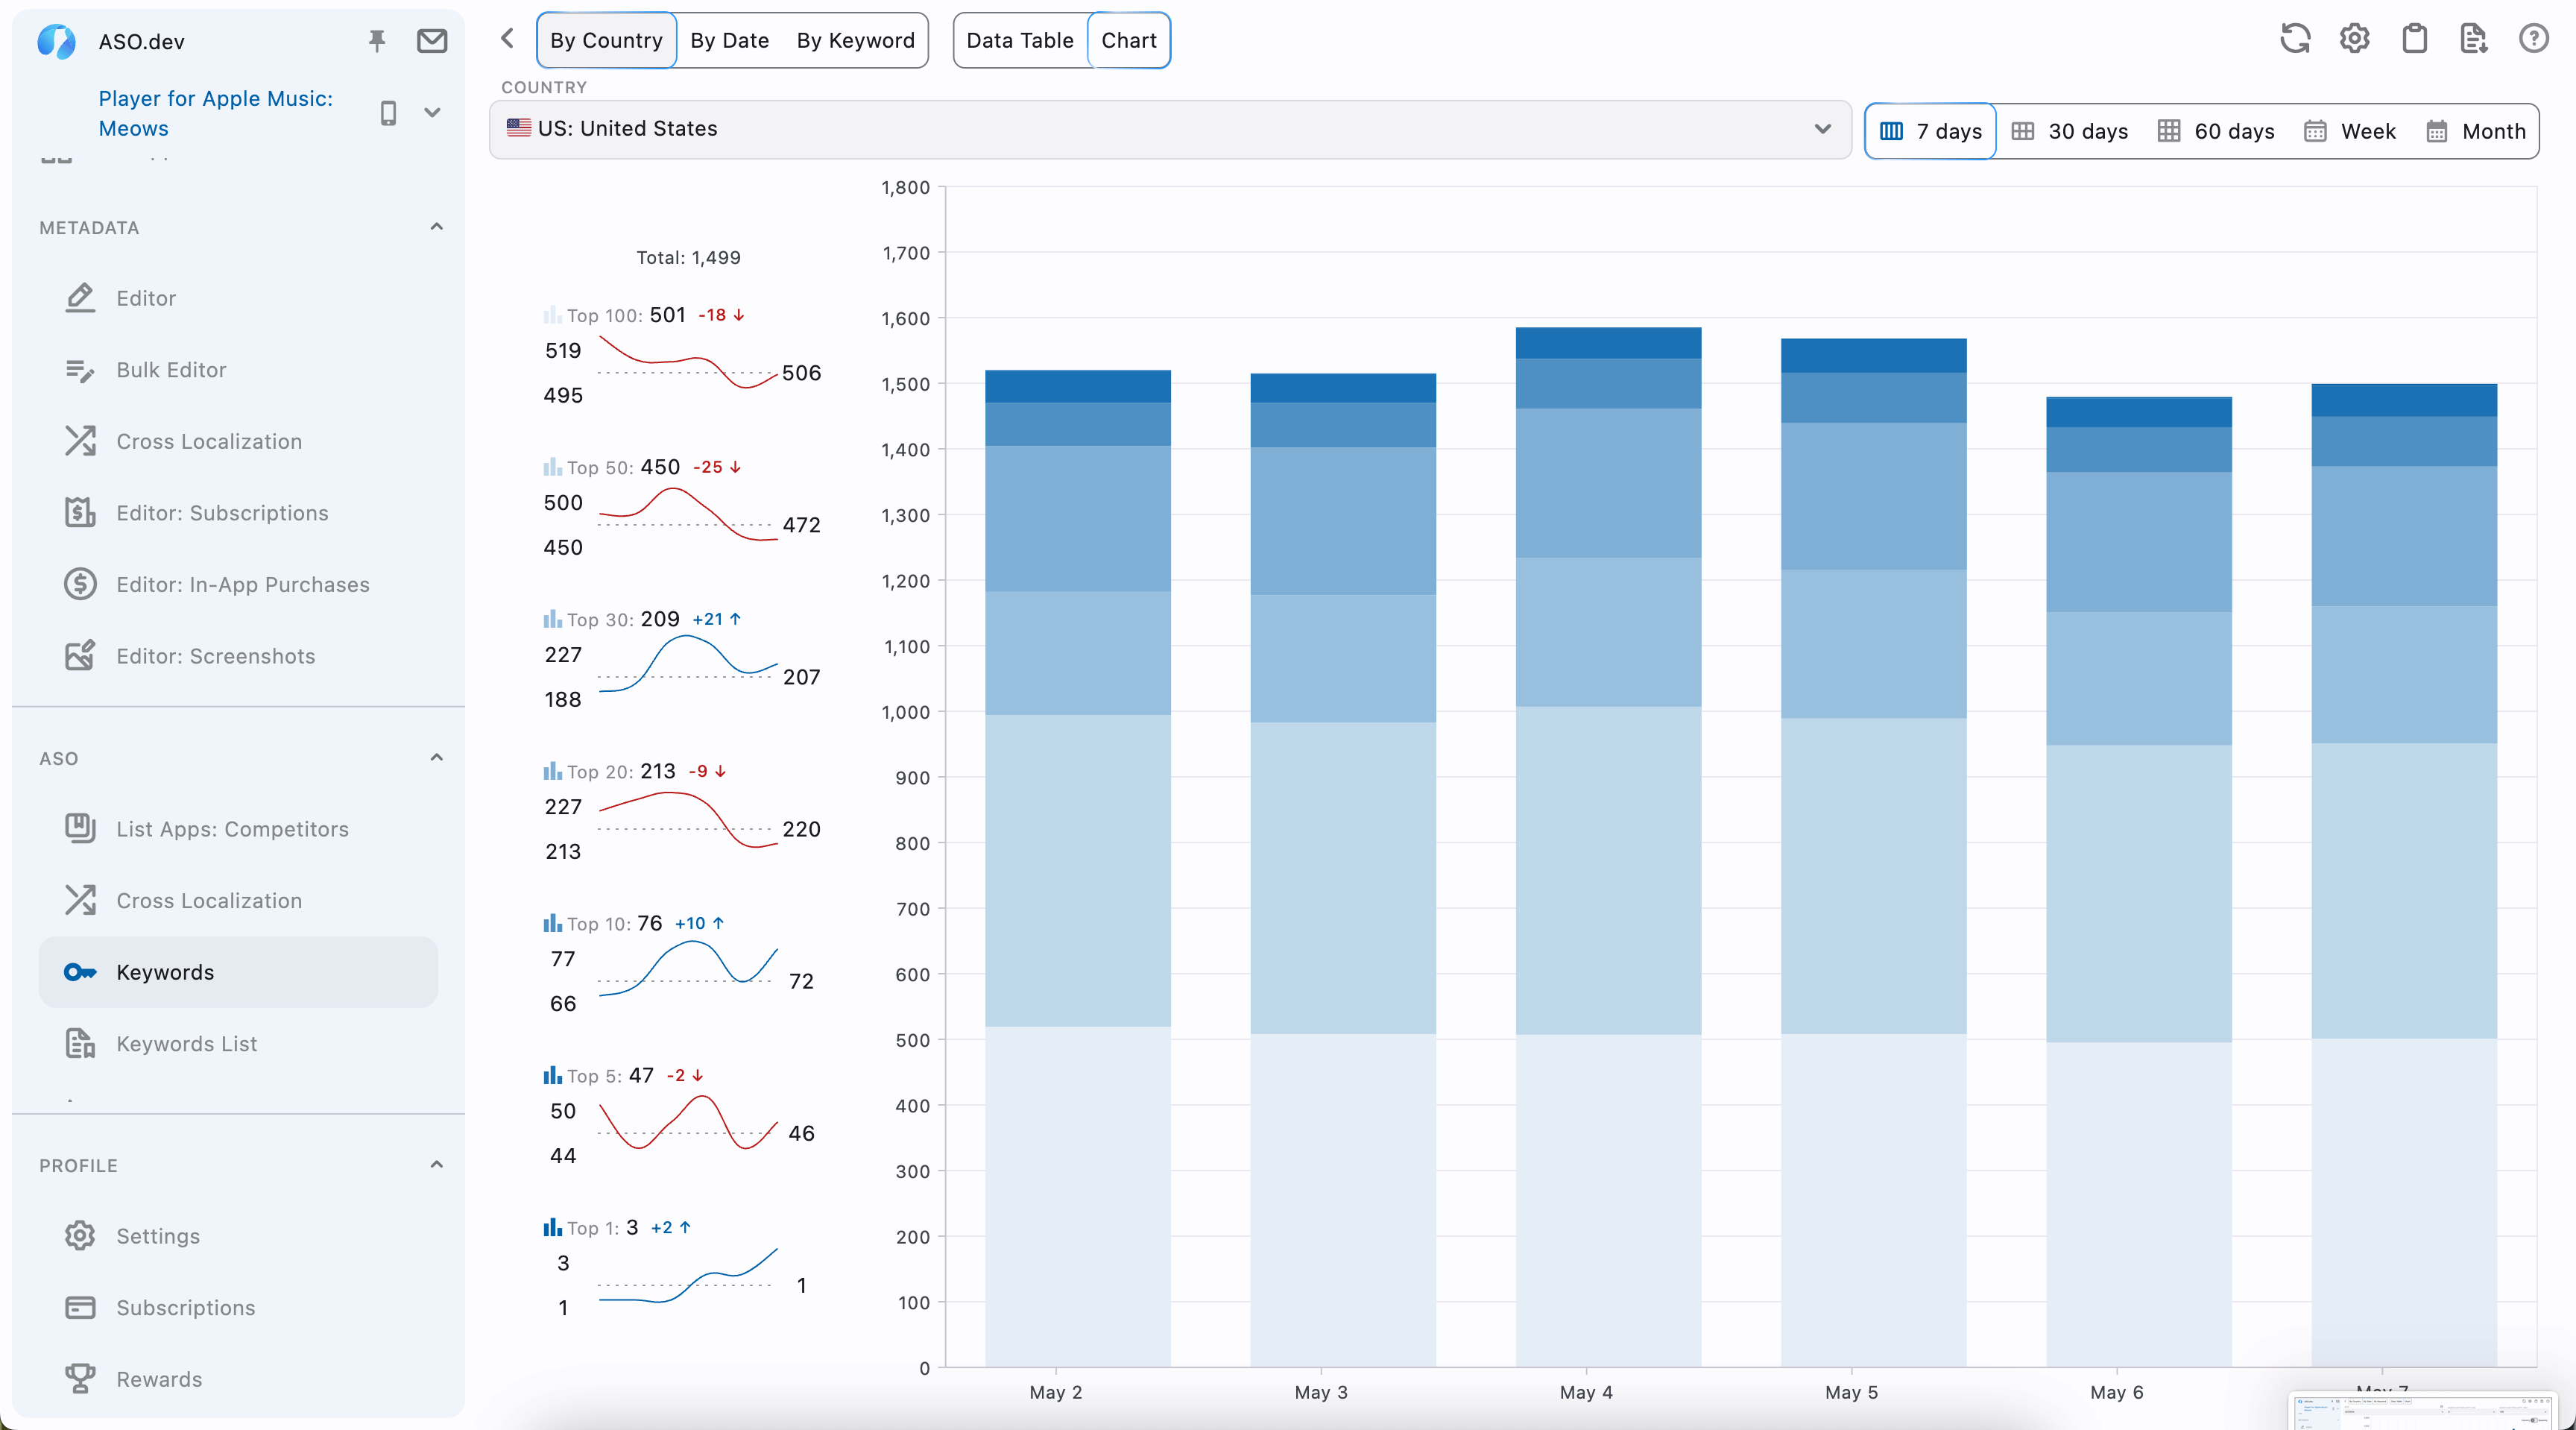 Chart view by Country